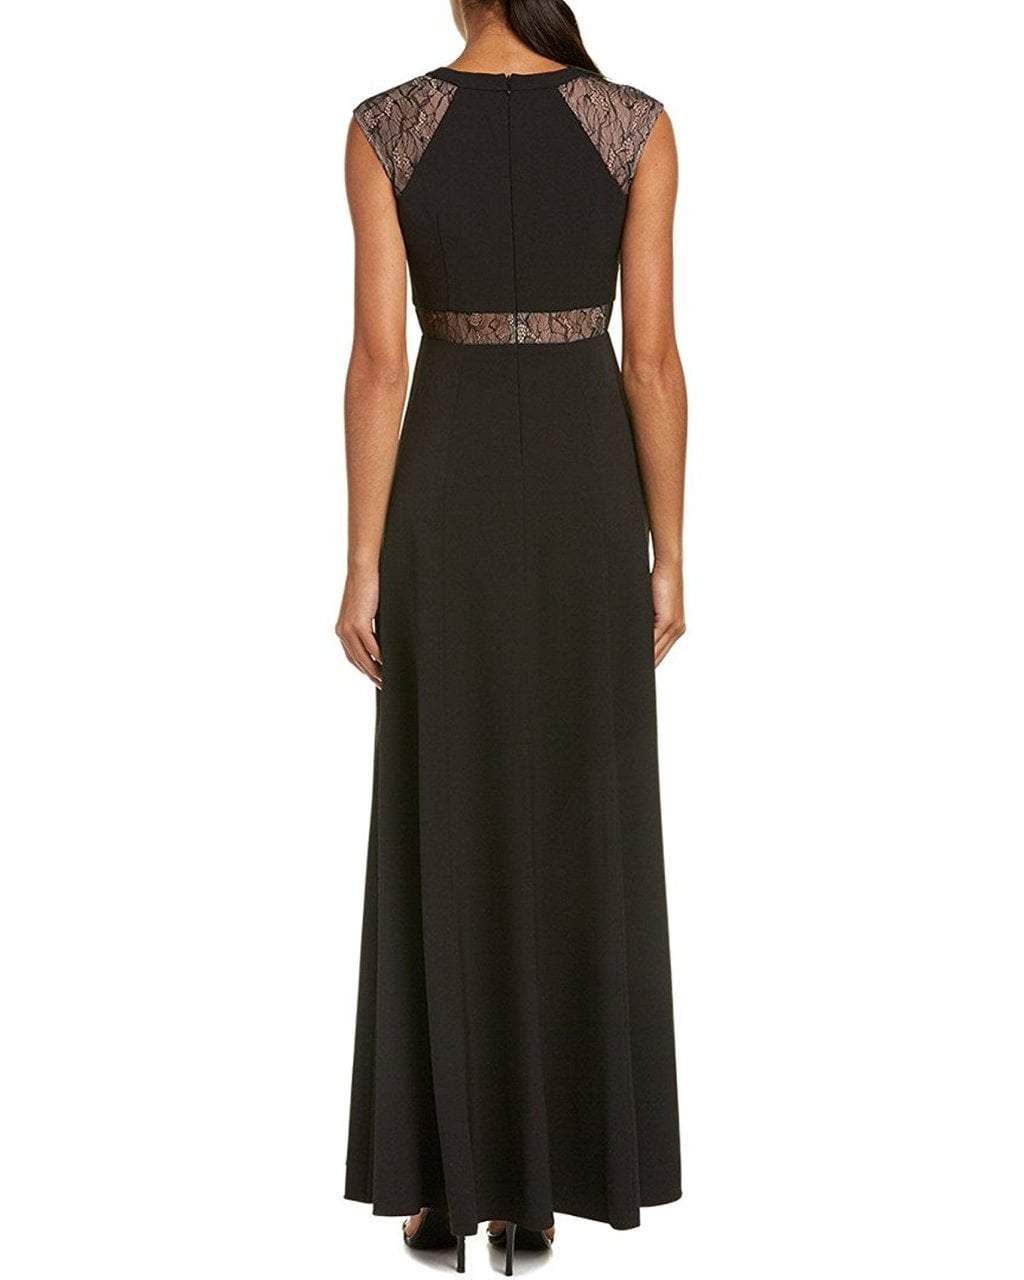 Aidan Mattox - MN1E201092 Lace Paneled Cap Sleeve Crepe A-line Gown in Black